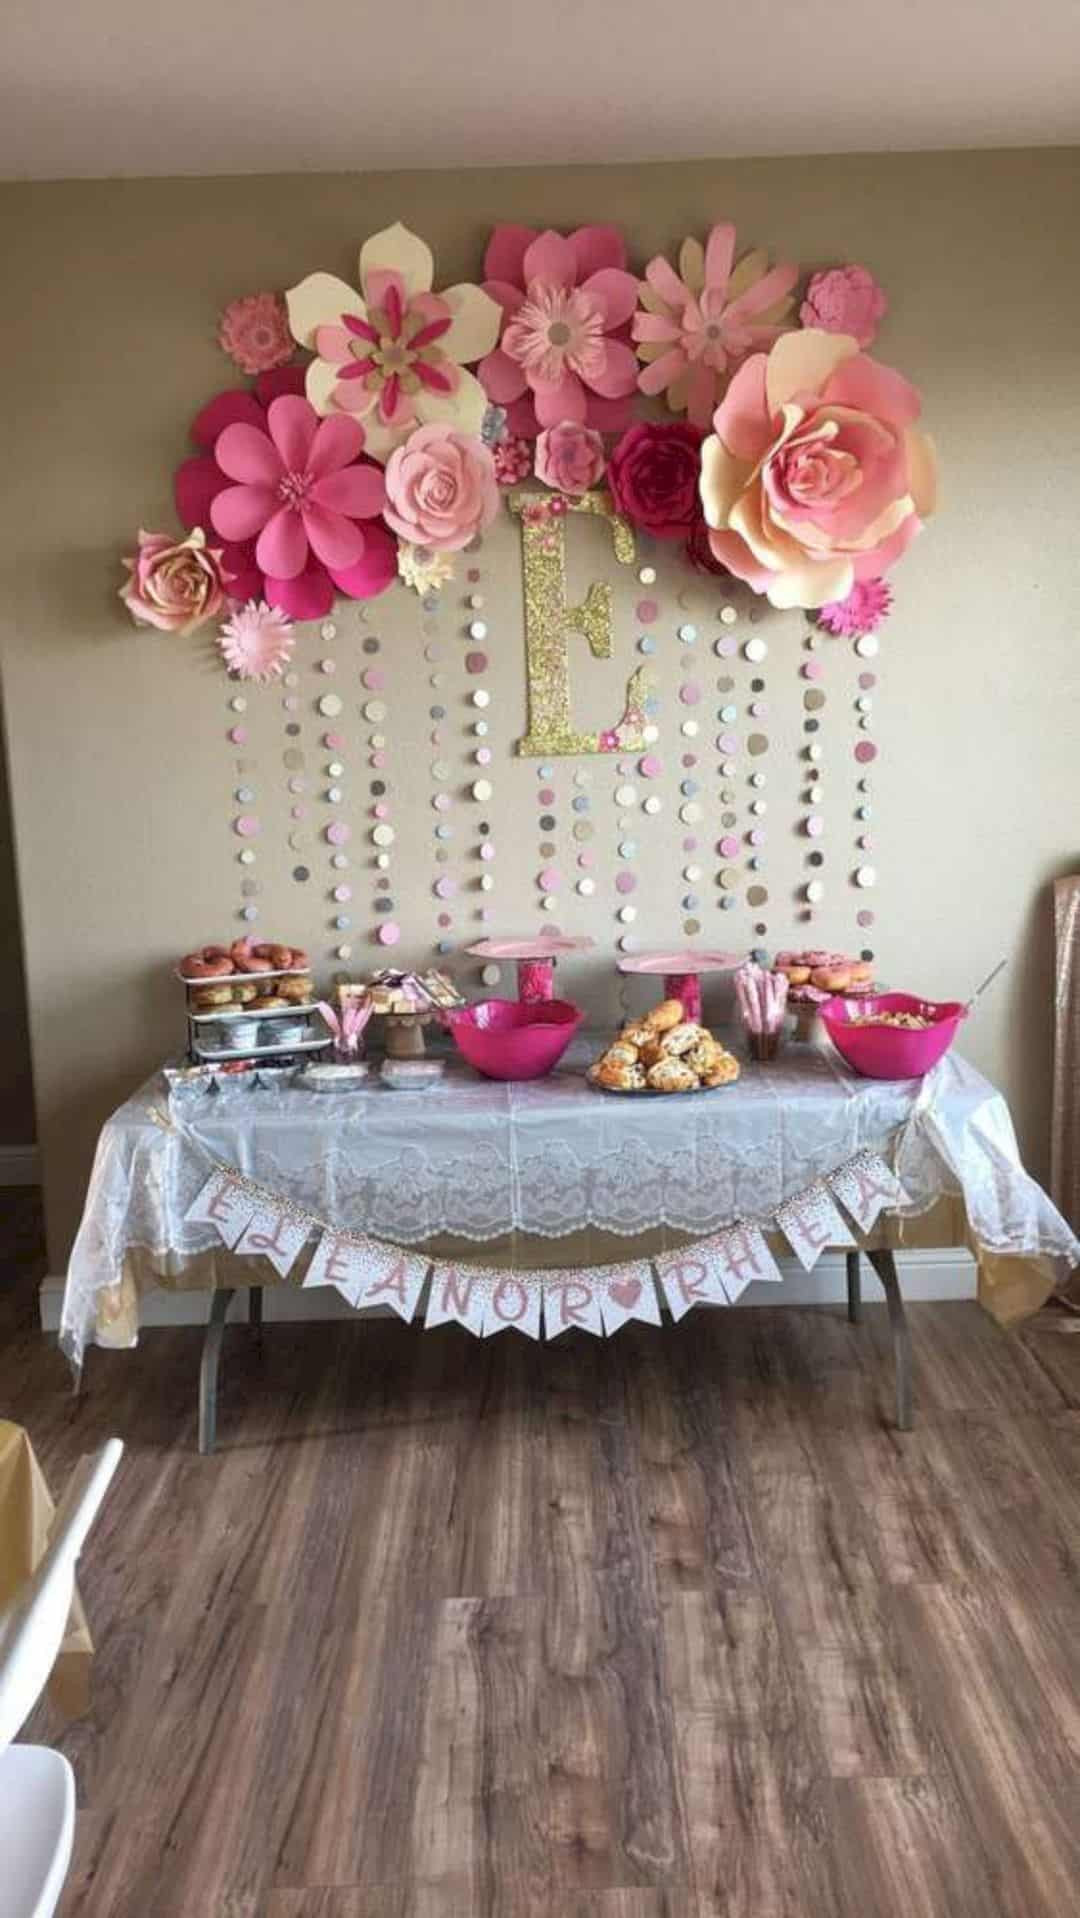 Decorating Ideas For Girl Baby Shower
 16 Cute Baby Shower Decorating Ideas